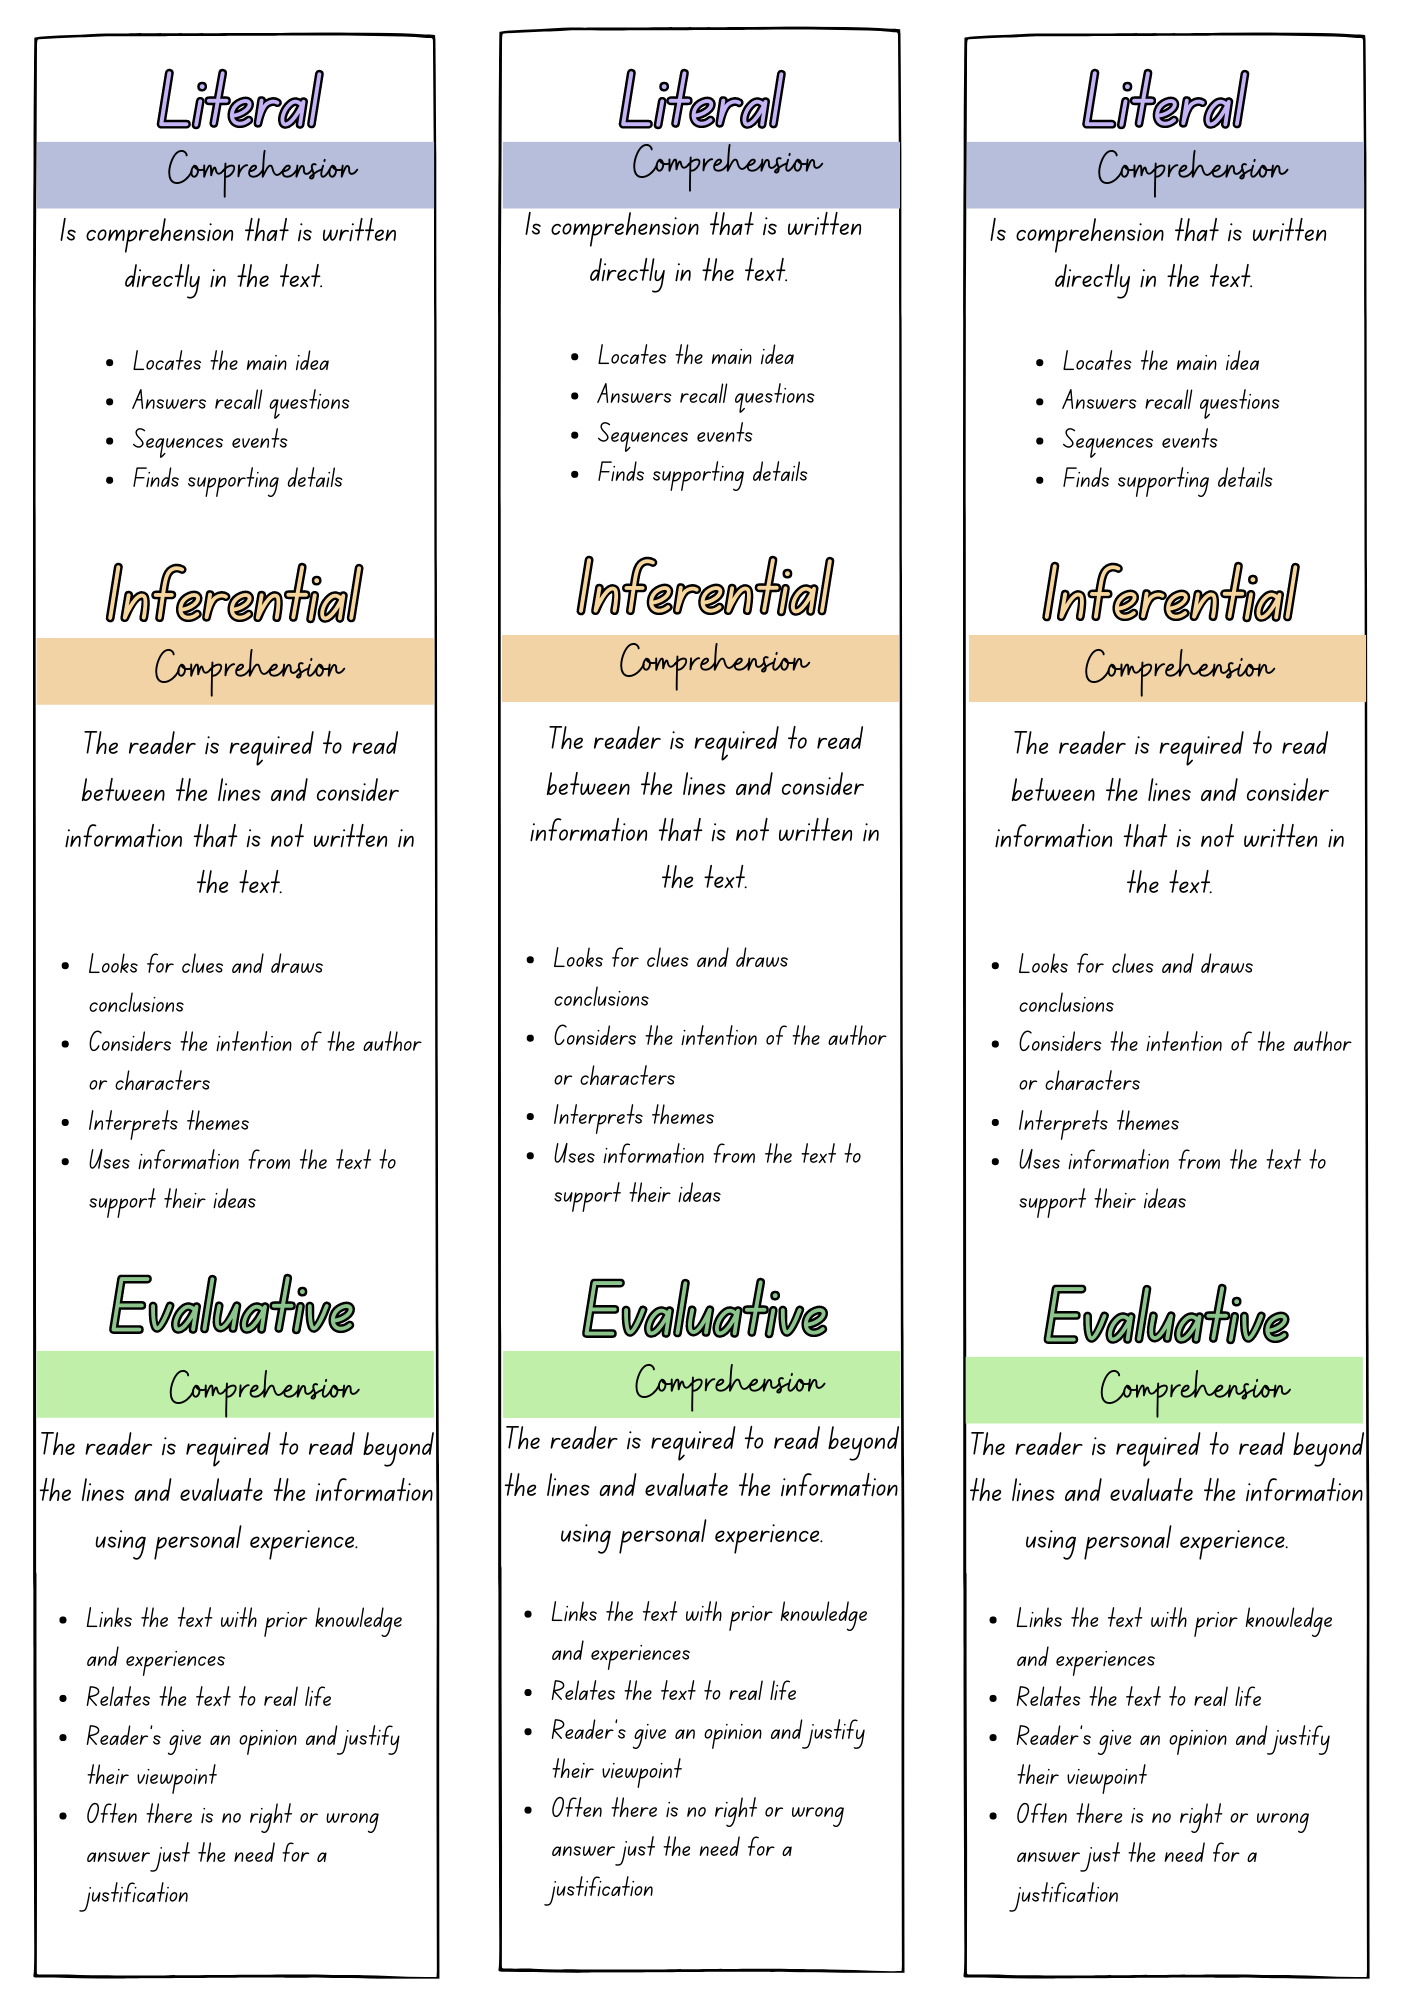 Literal, Inferential and Evaluative Comprehension